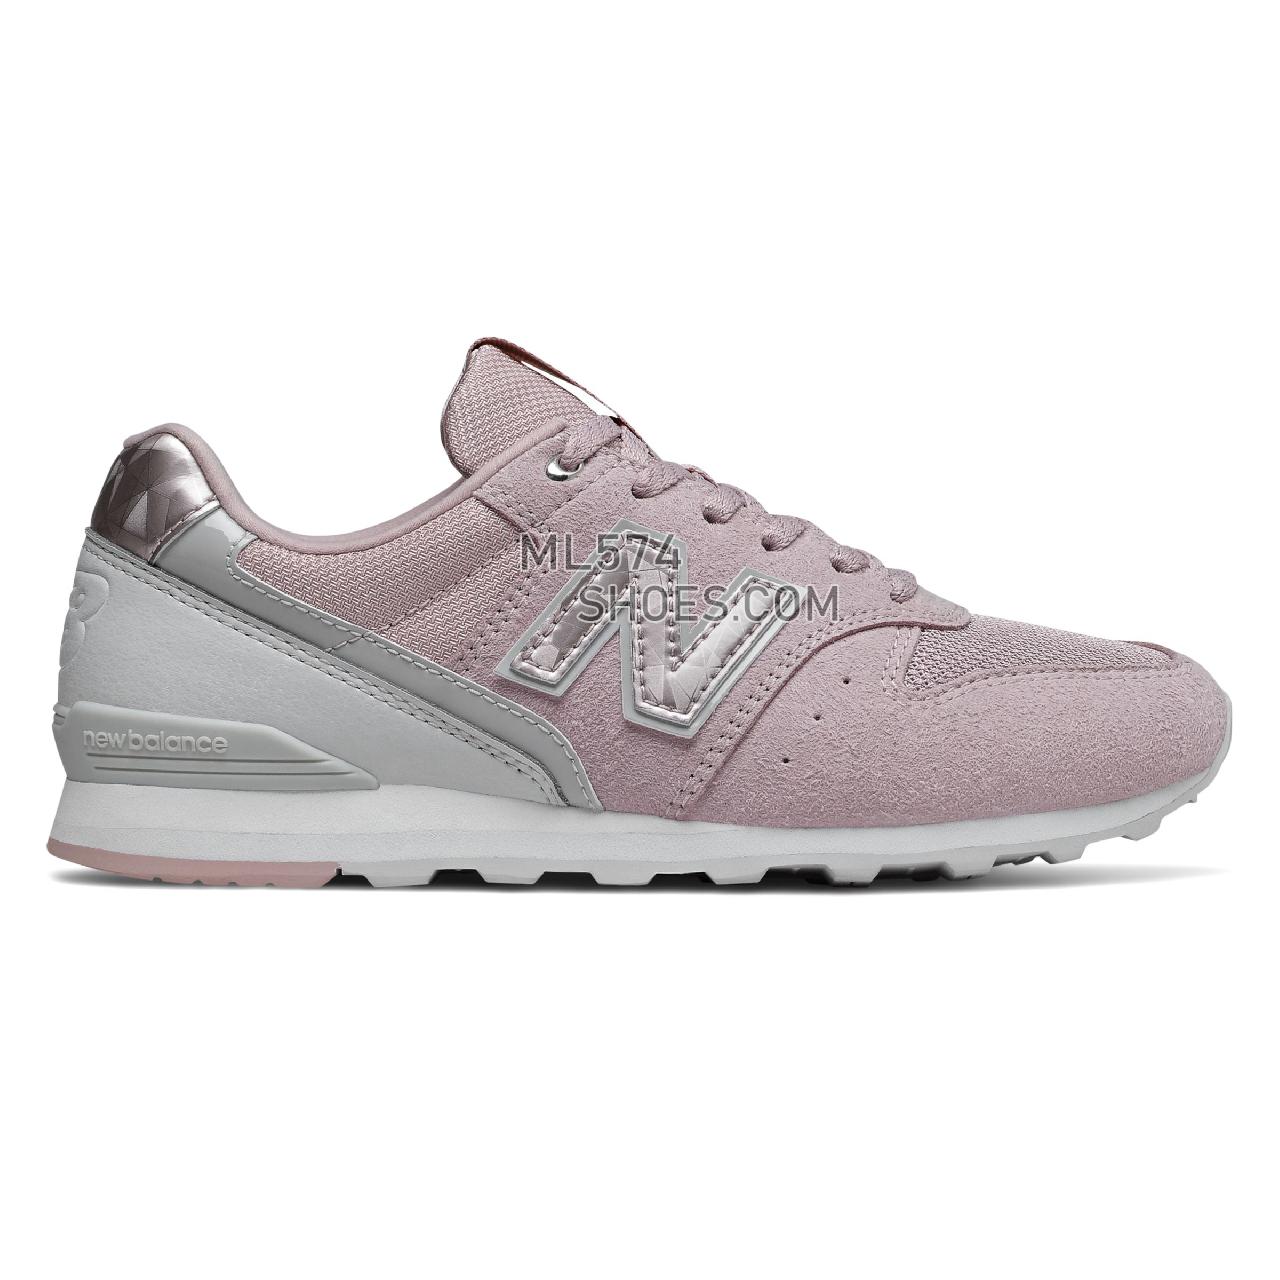 New Balance WL996v2 - Women's Classic Sneakers - Space Pink with Summer Fog - WL996QA